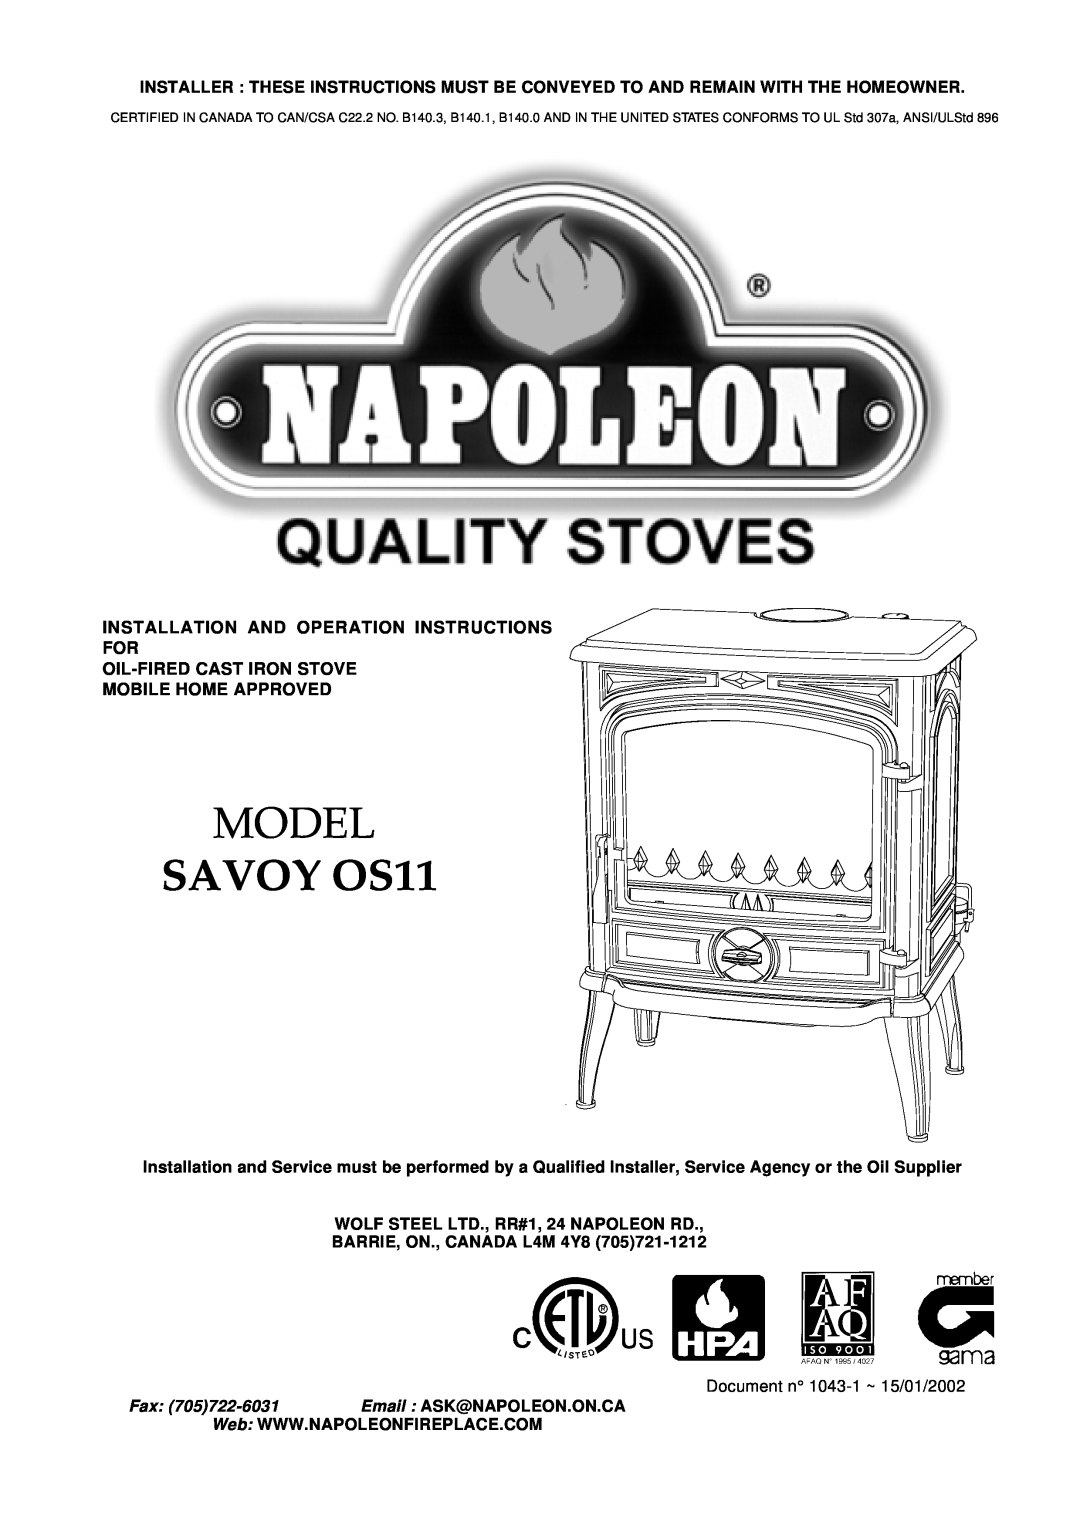 Napoleon Fireplaces SAVOY OS11 manual Model, BARRIE, ON., CANADA L4M 4Y8, Fax 705722-6031Email ASK@NAPOLEON.ON.CA 